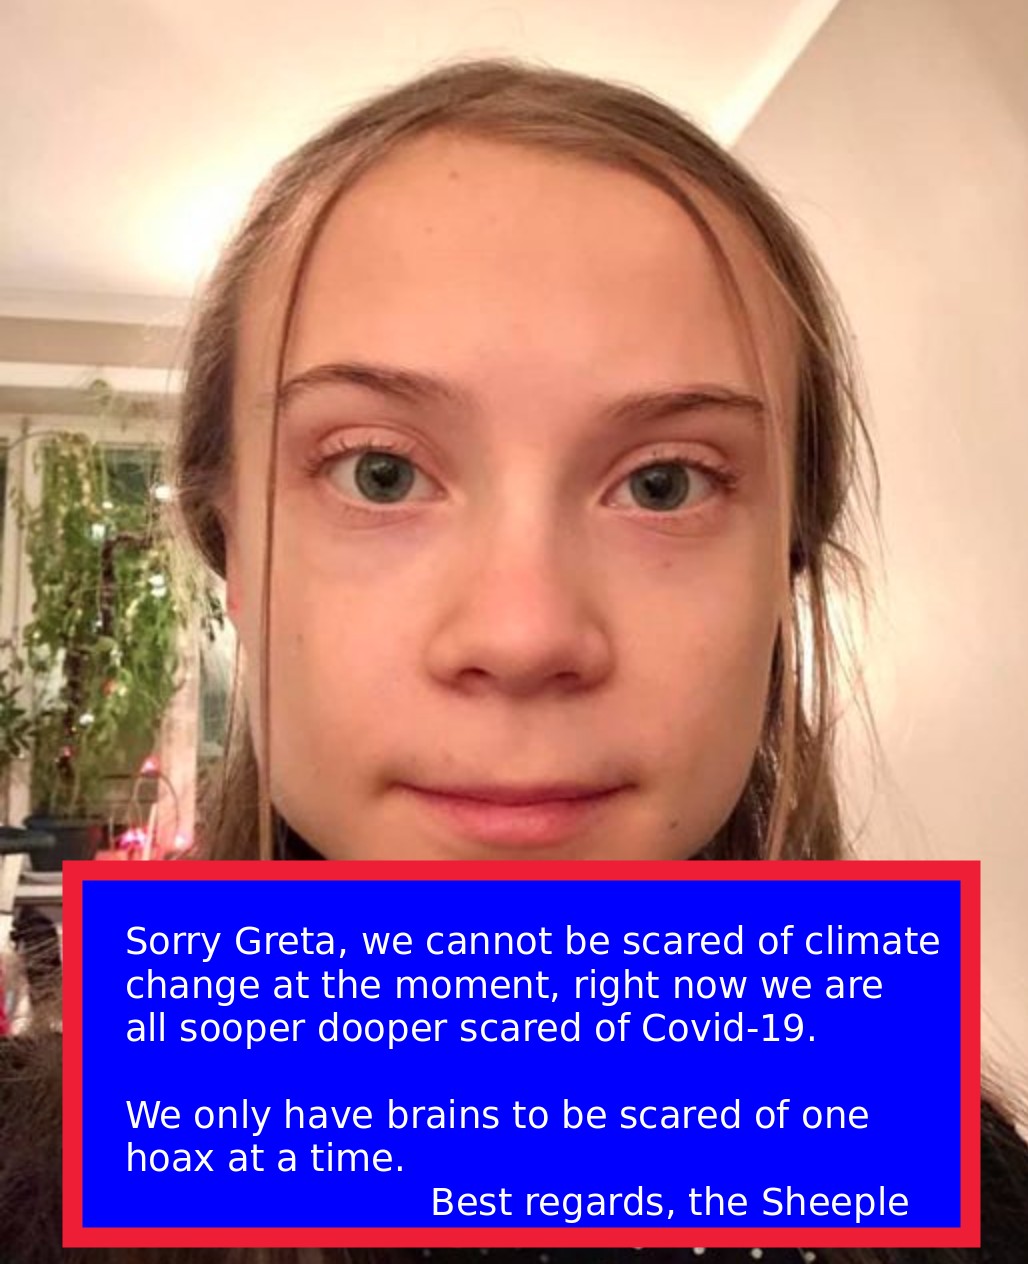 Sorry Greta – we cannot be scared of climate change right now!